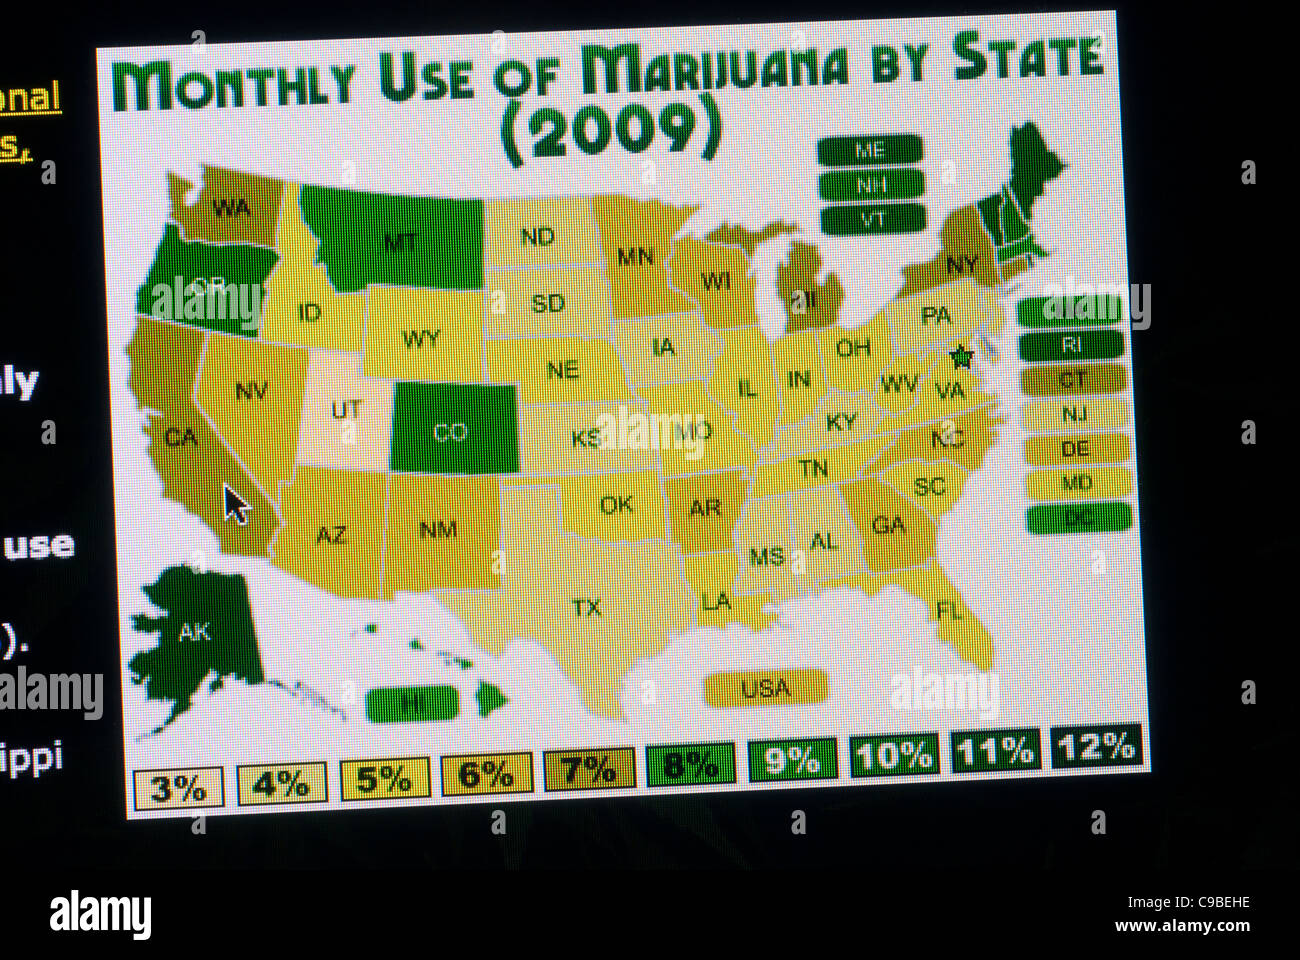 Monthly Use of Marijuana by State (2009) chart on NORML's website Stock Photo